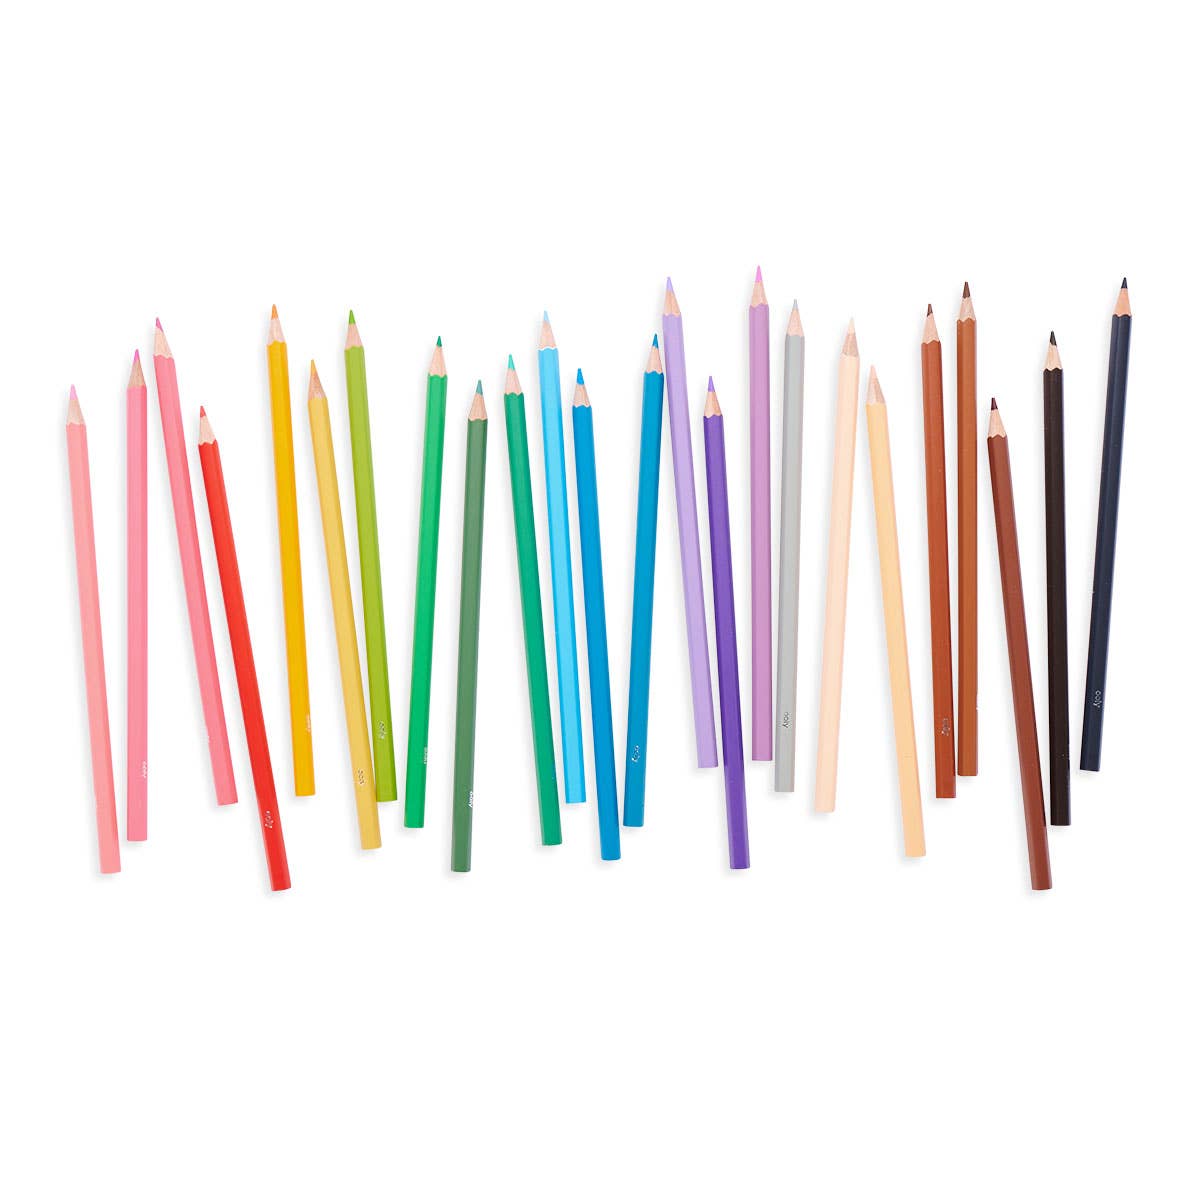 OOLY - Color Together Colored Pencils - Set of 24  OOLY   -better made easy-eco-friendly-sustainable-gifting